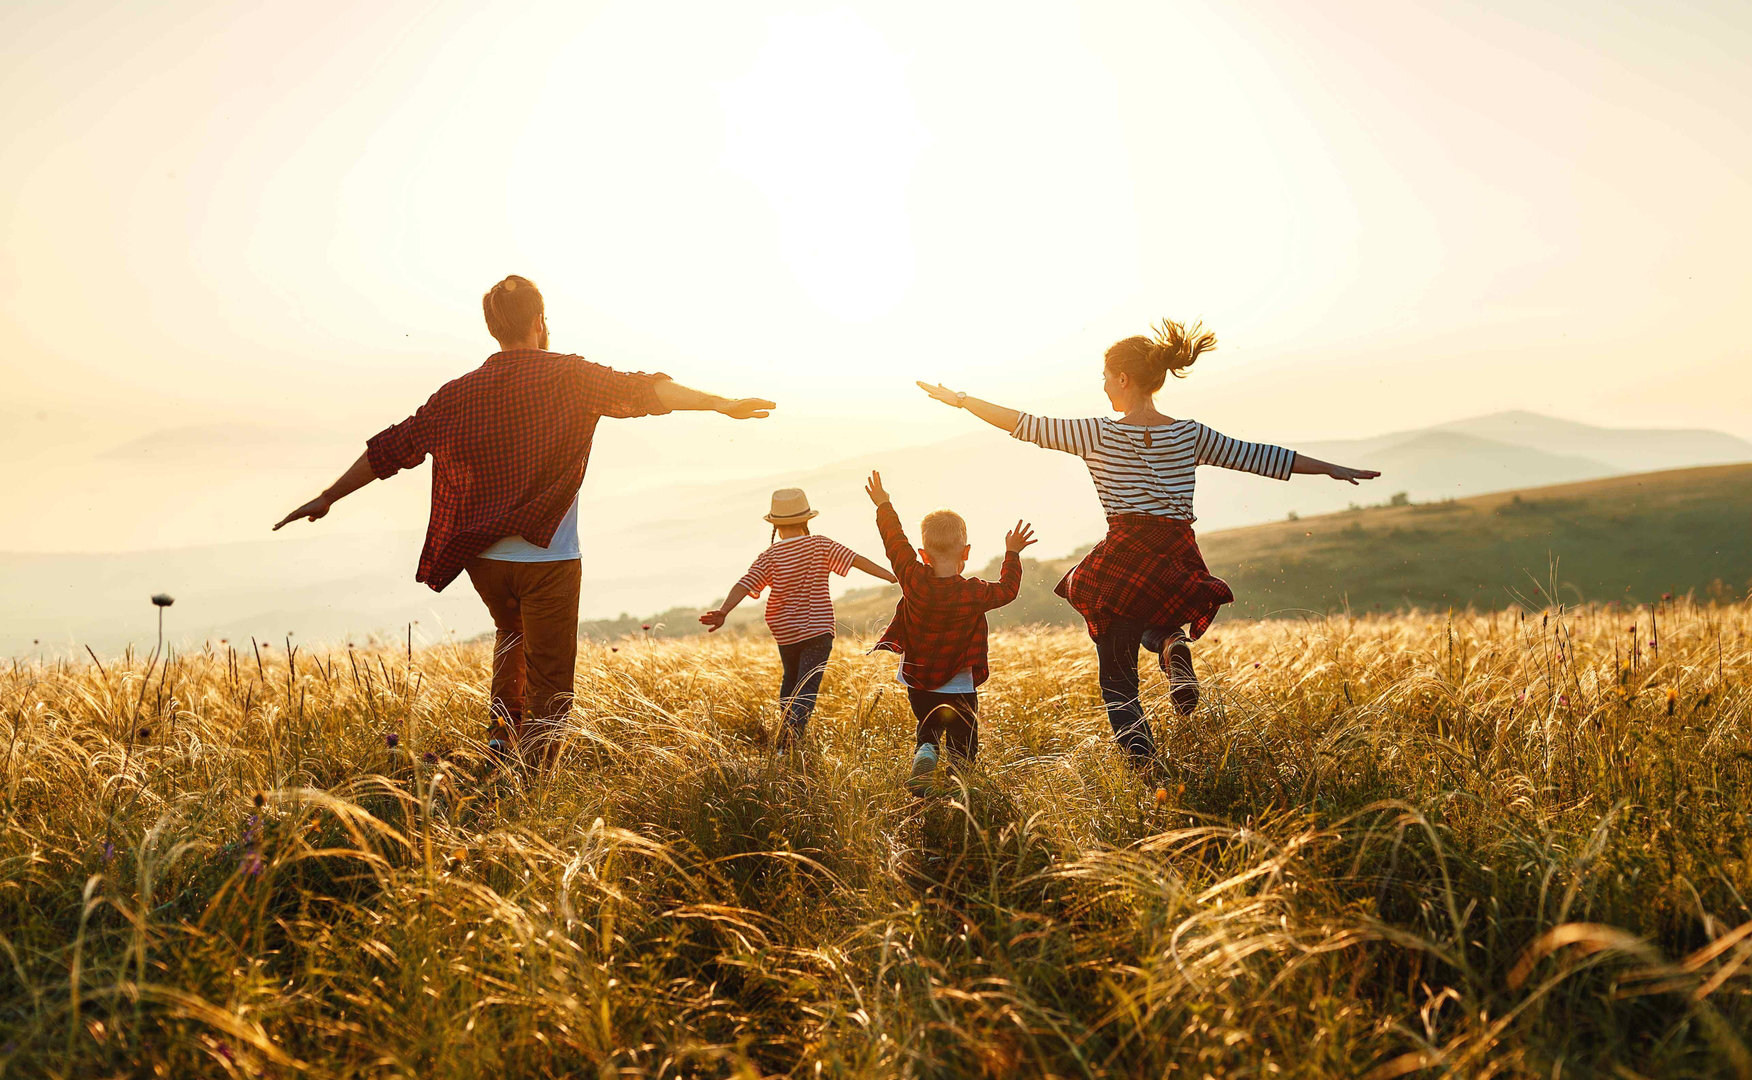 World Tourism Day: Family walking in a field holding hands